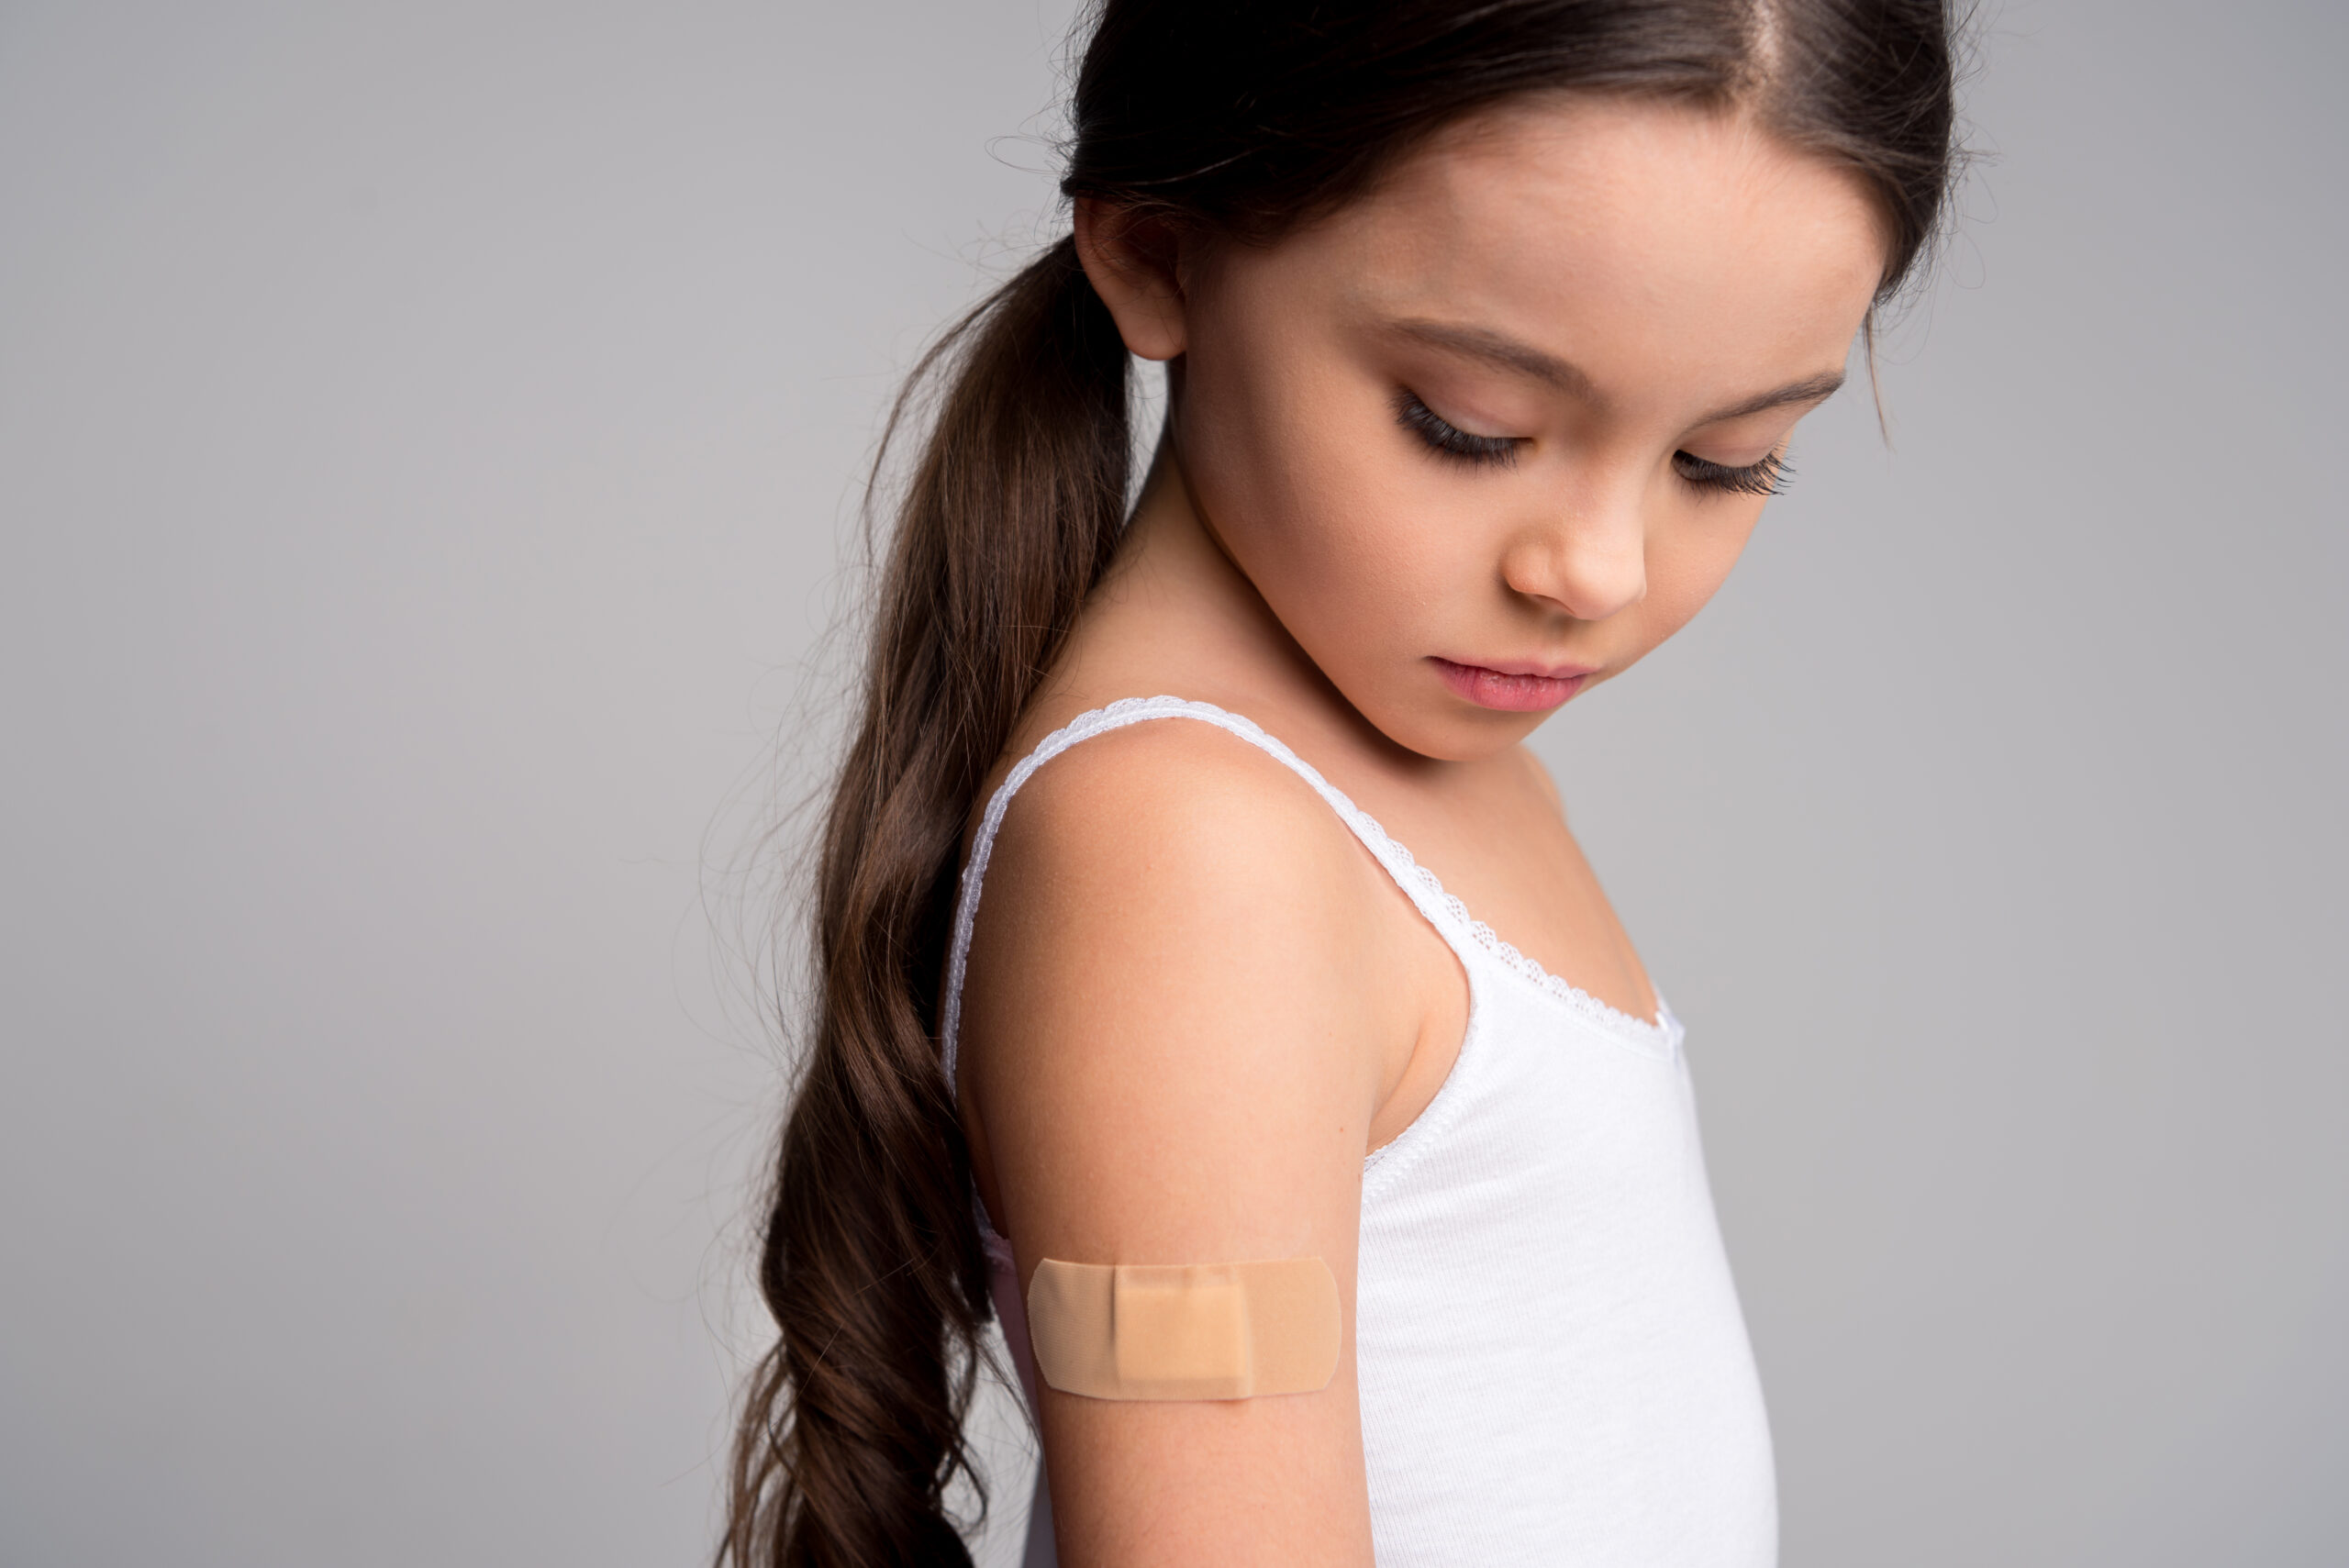 Why does my arm hurt the day after I get my flu shot?